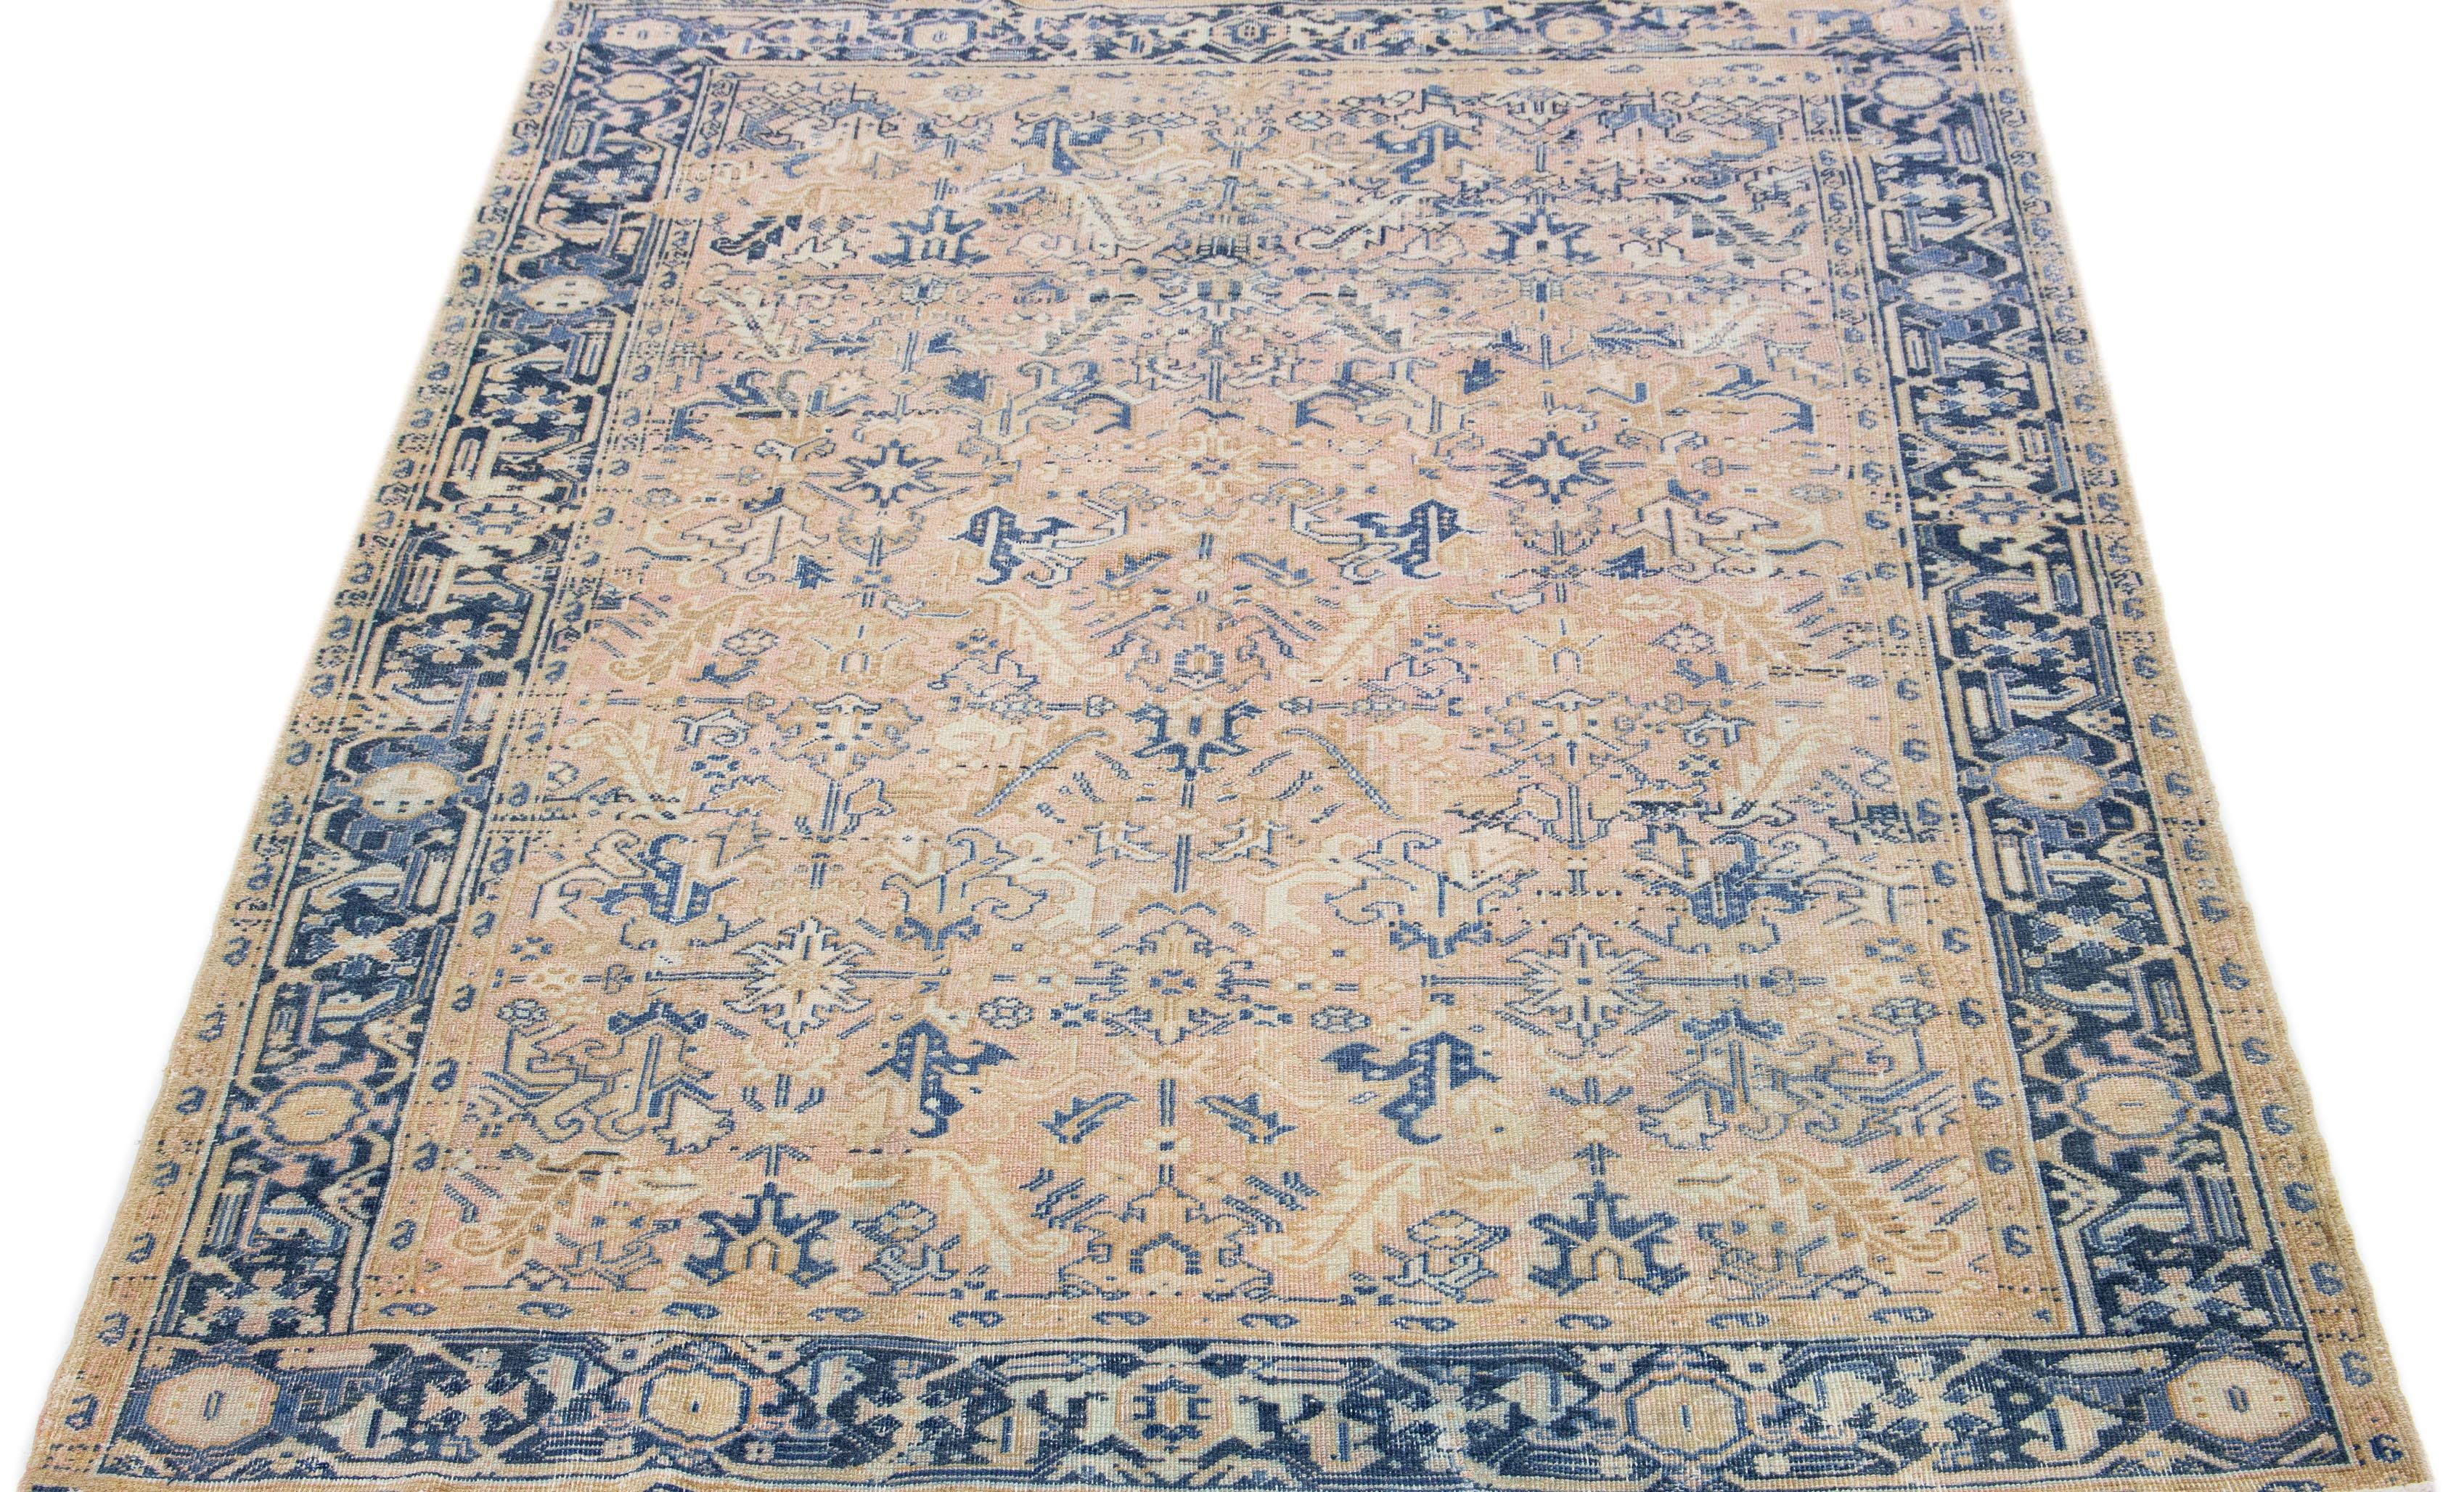 This Persian rug boasts a splendid all-over design with an eye-catching geometric floral pattern in shades of blue and brown set against a soft peach field. Using premium hand knotted wool, this antique Heriz rug radiates eternal class and